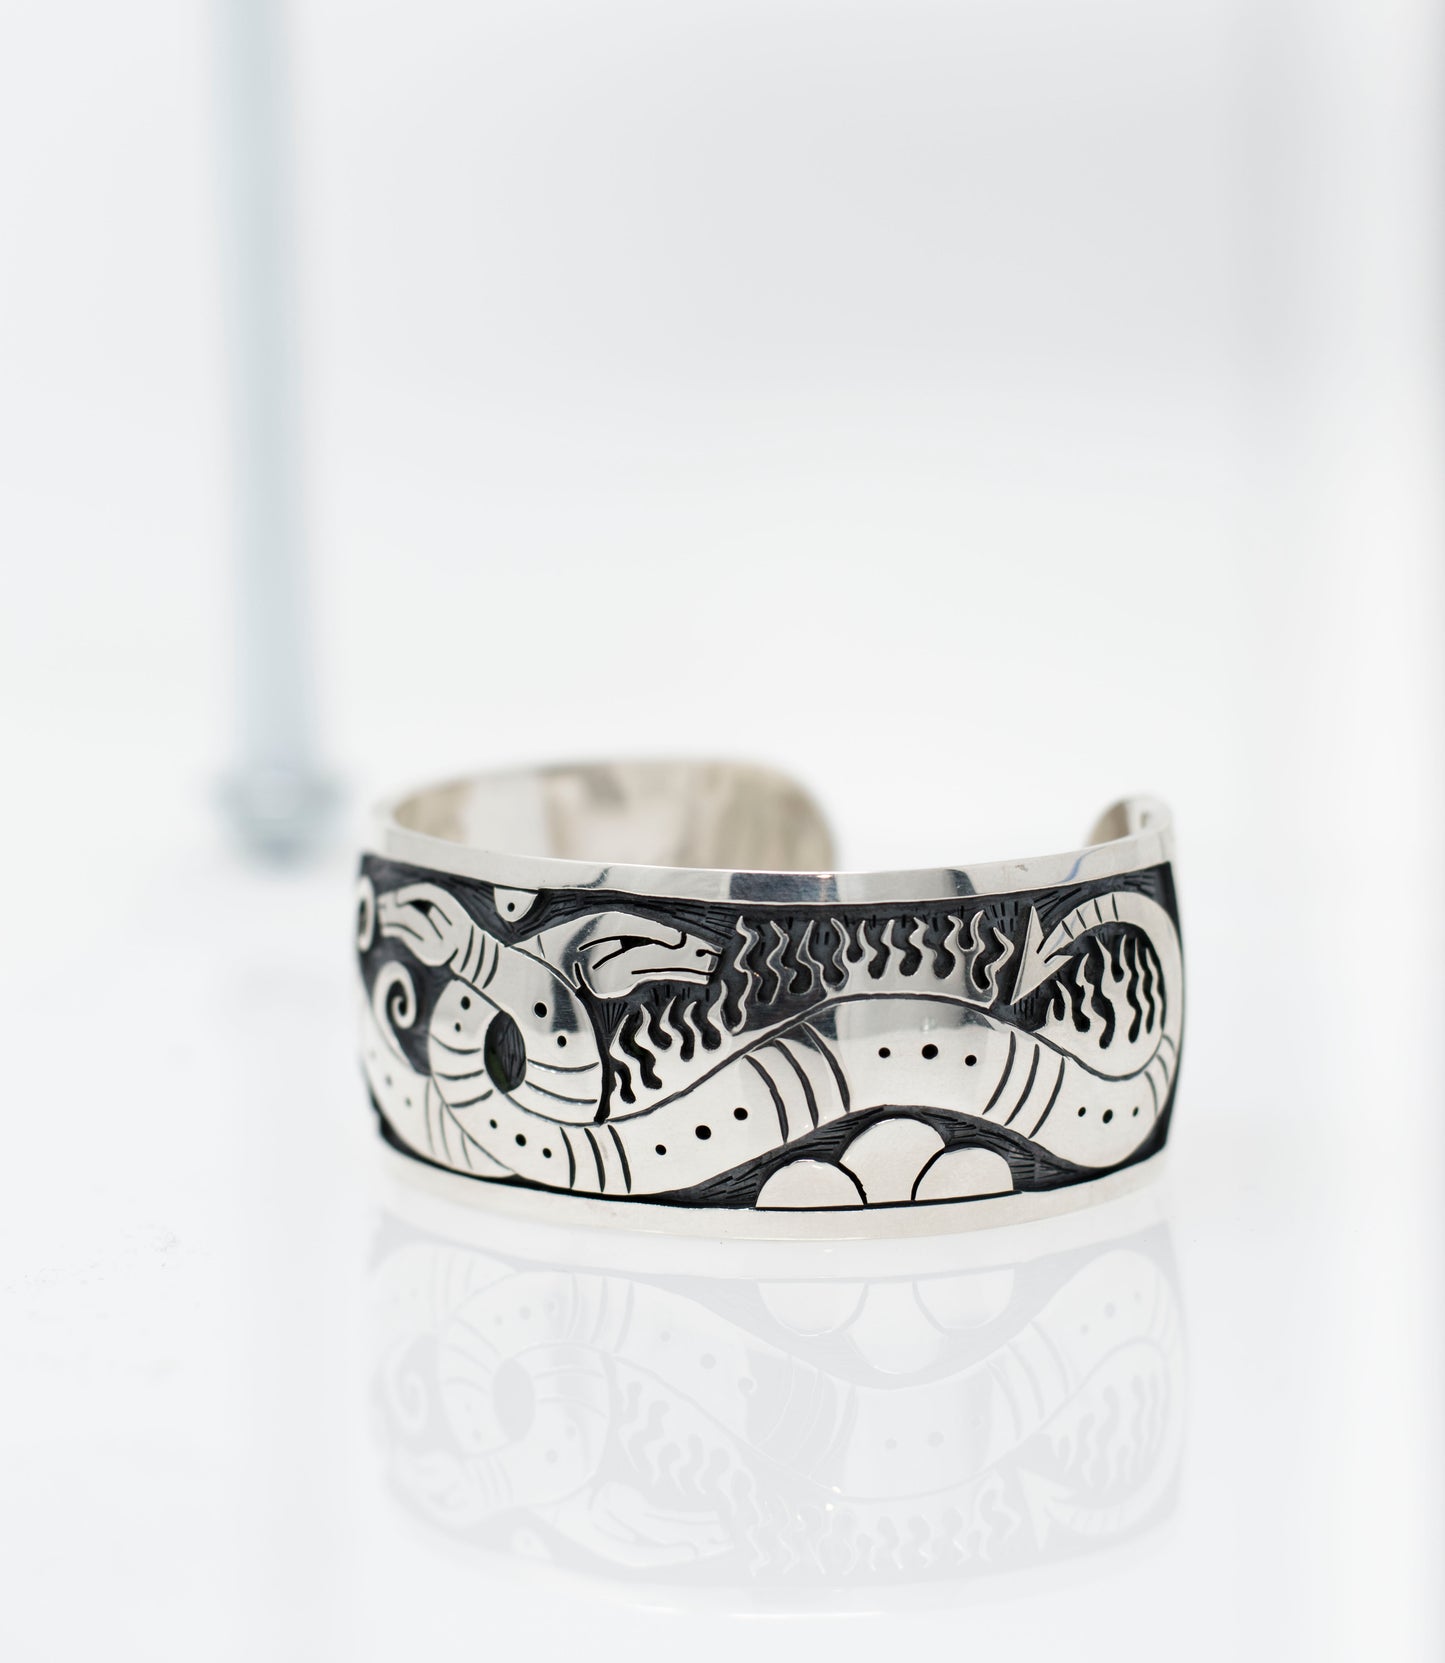 Hopi Water and Fire Snake Cuff